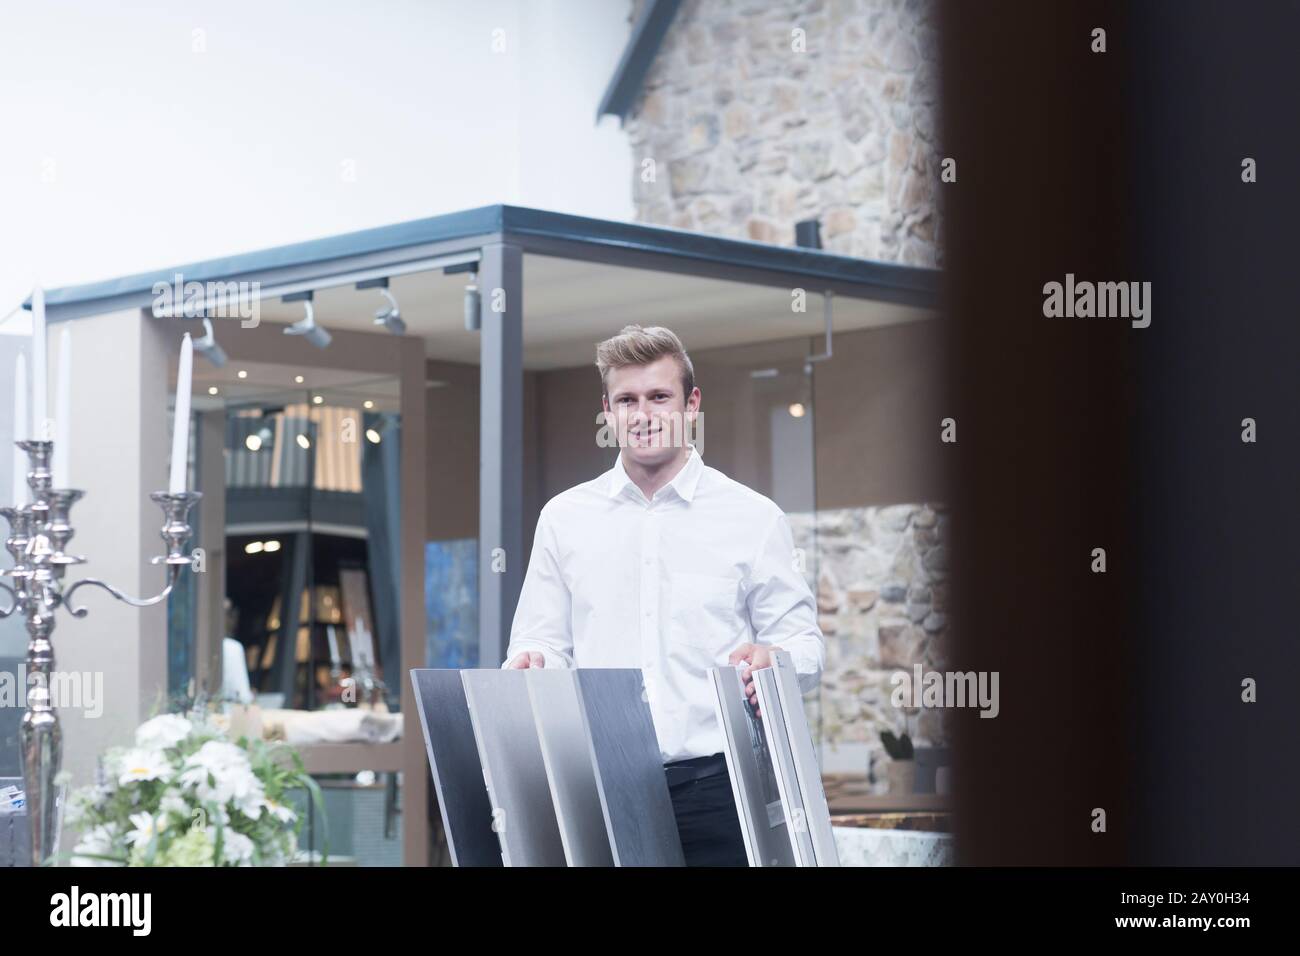 Salesman standing in a shop next to flooring samples, Germany Stock Photo